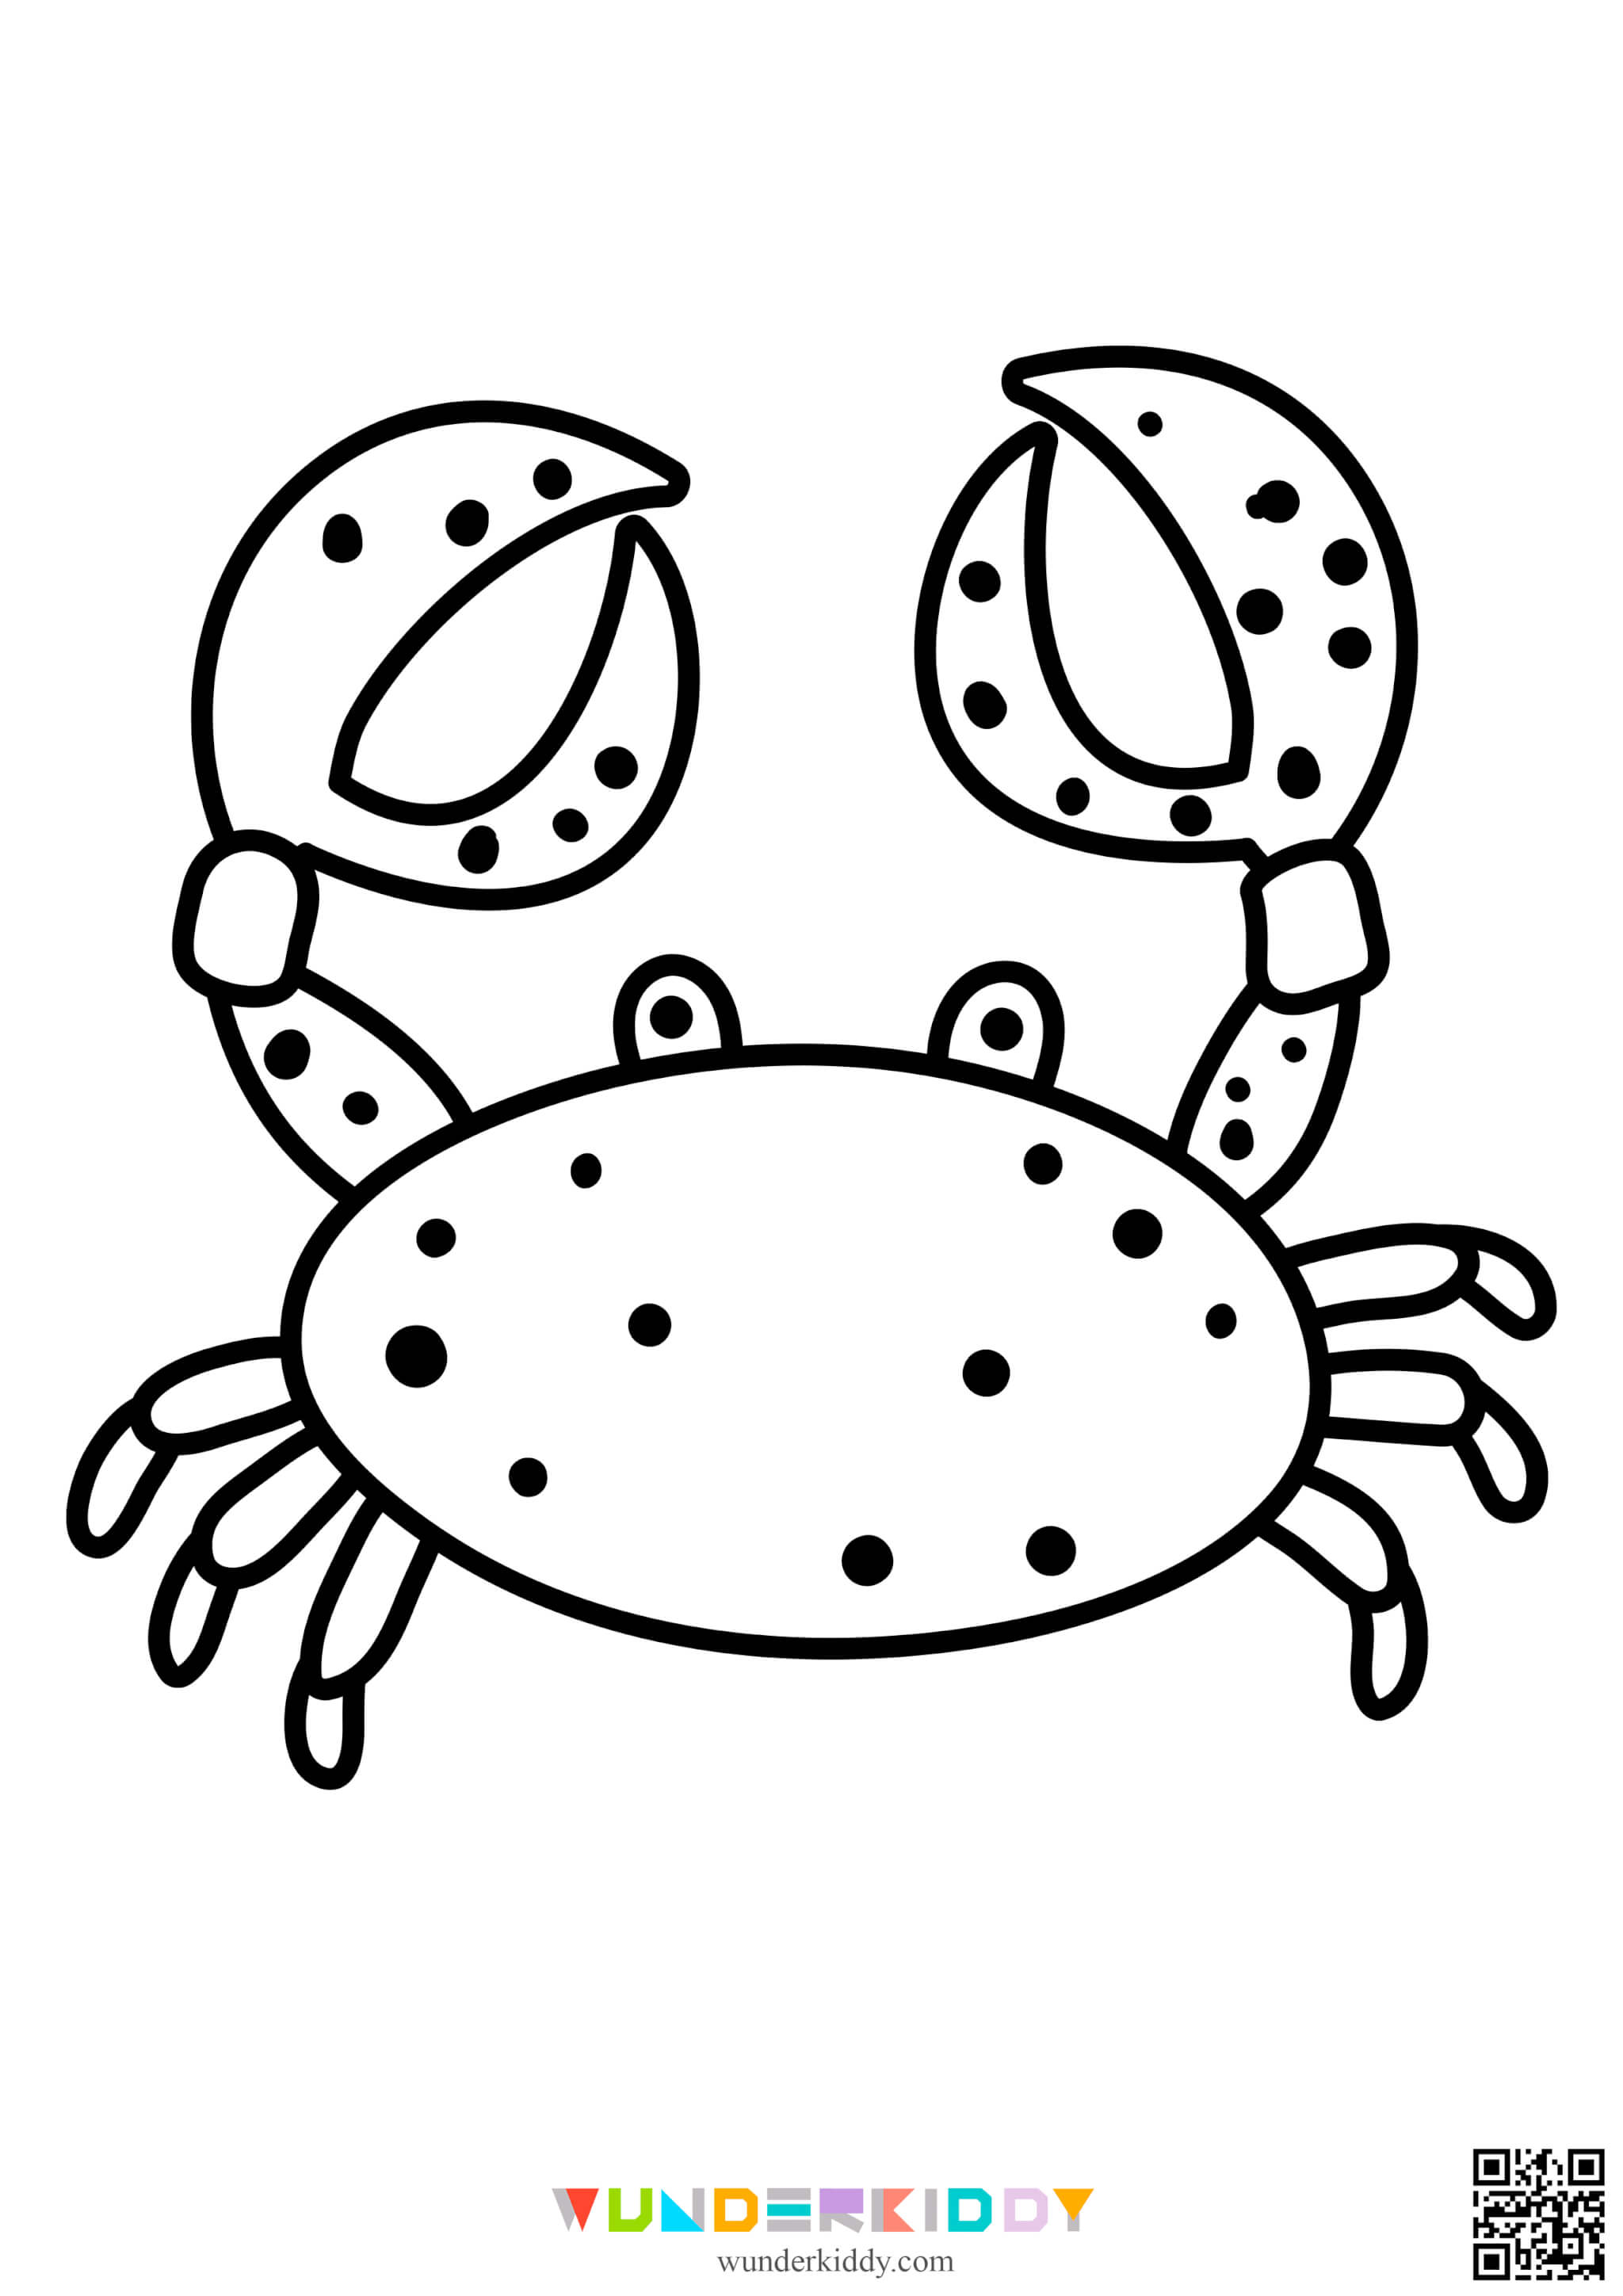 Summer Coloring Pages for Kids - Image 5